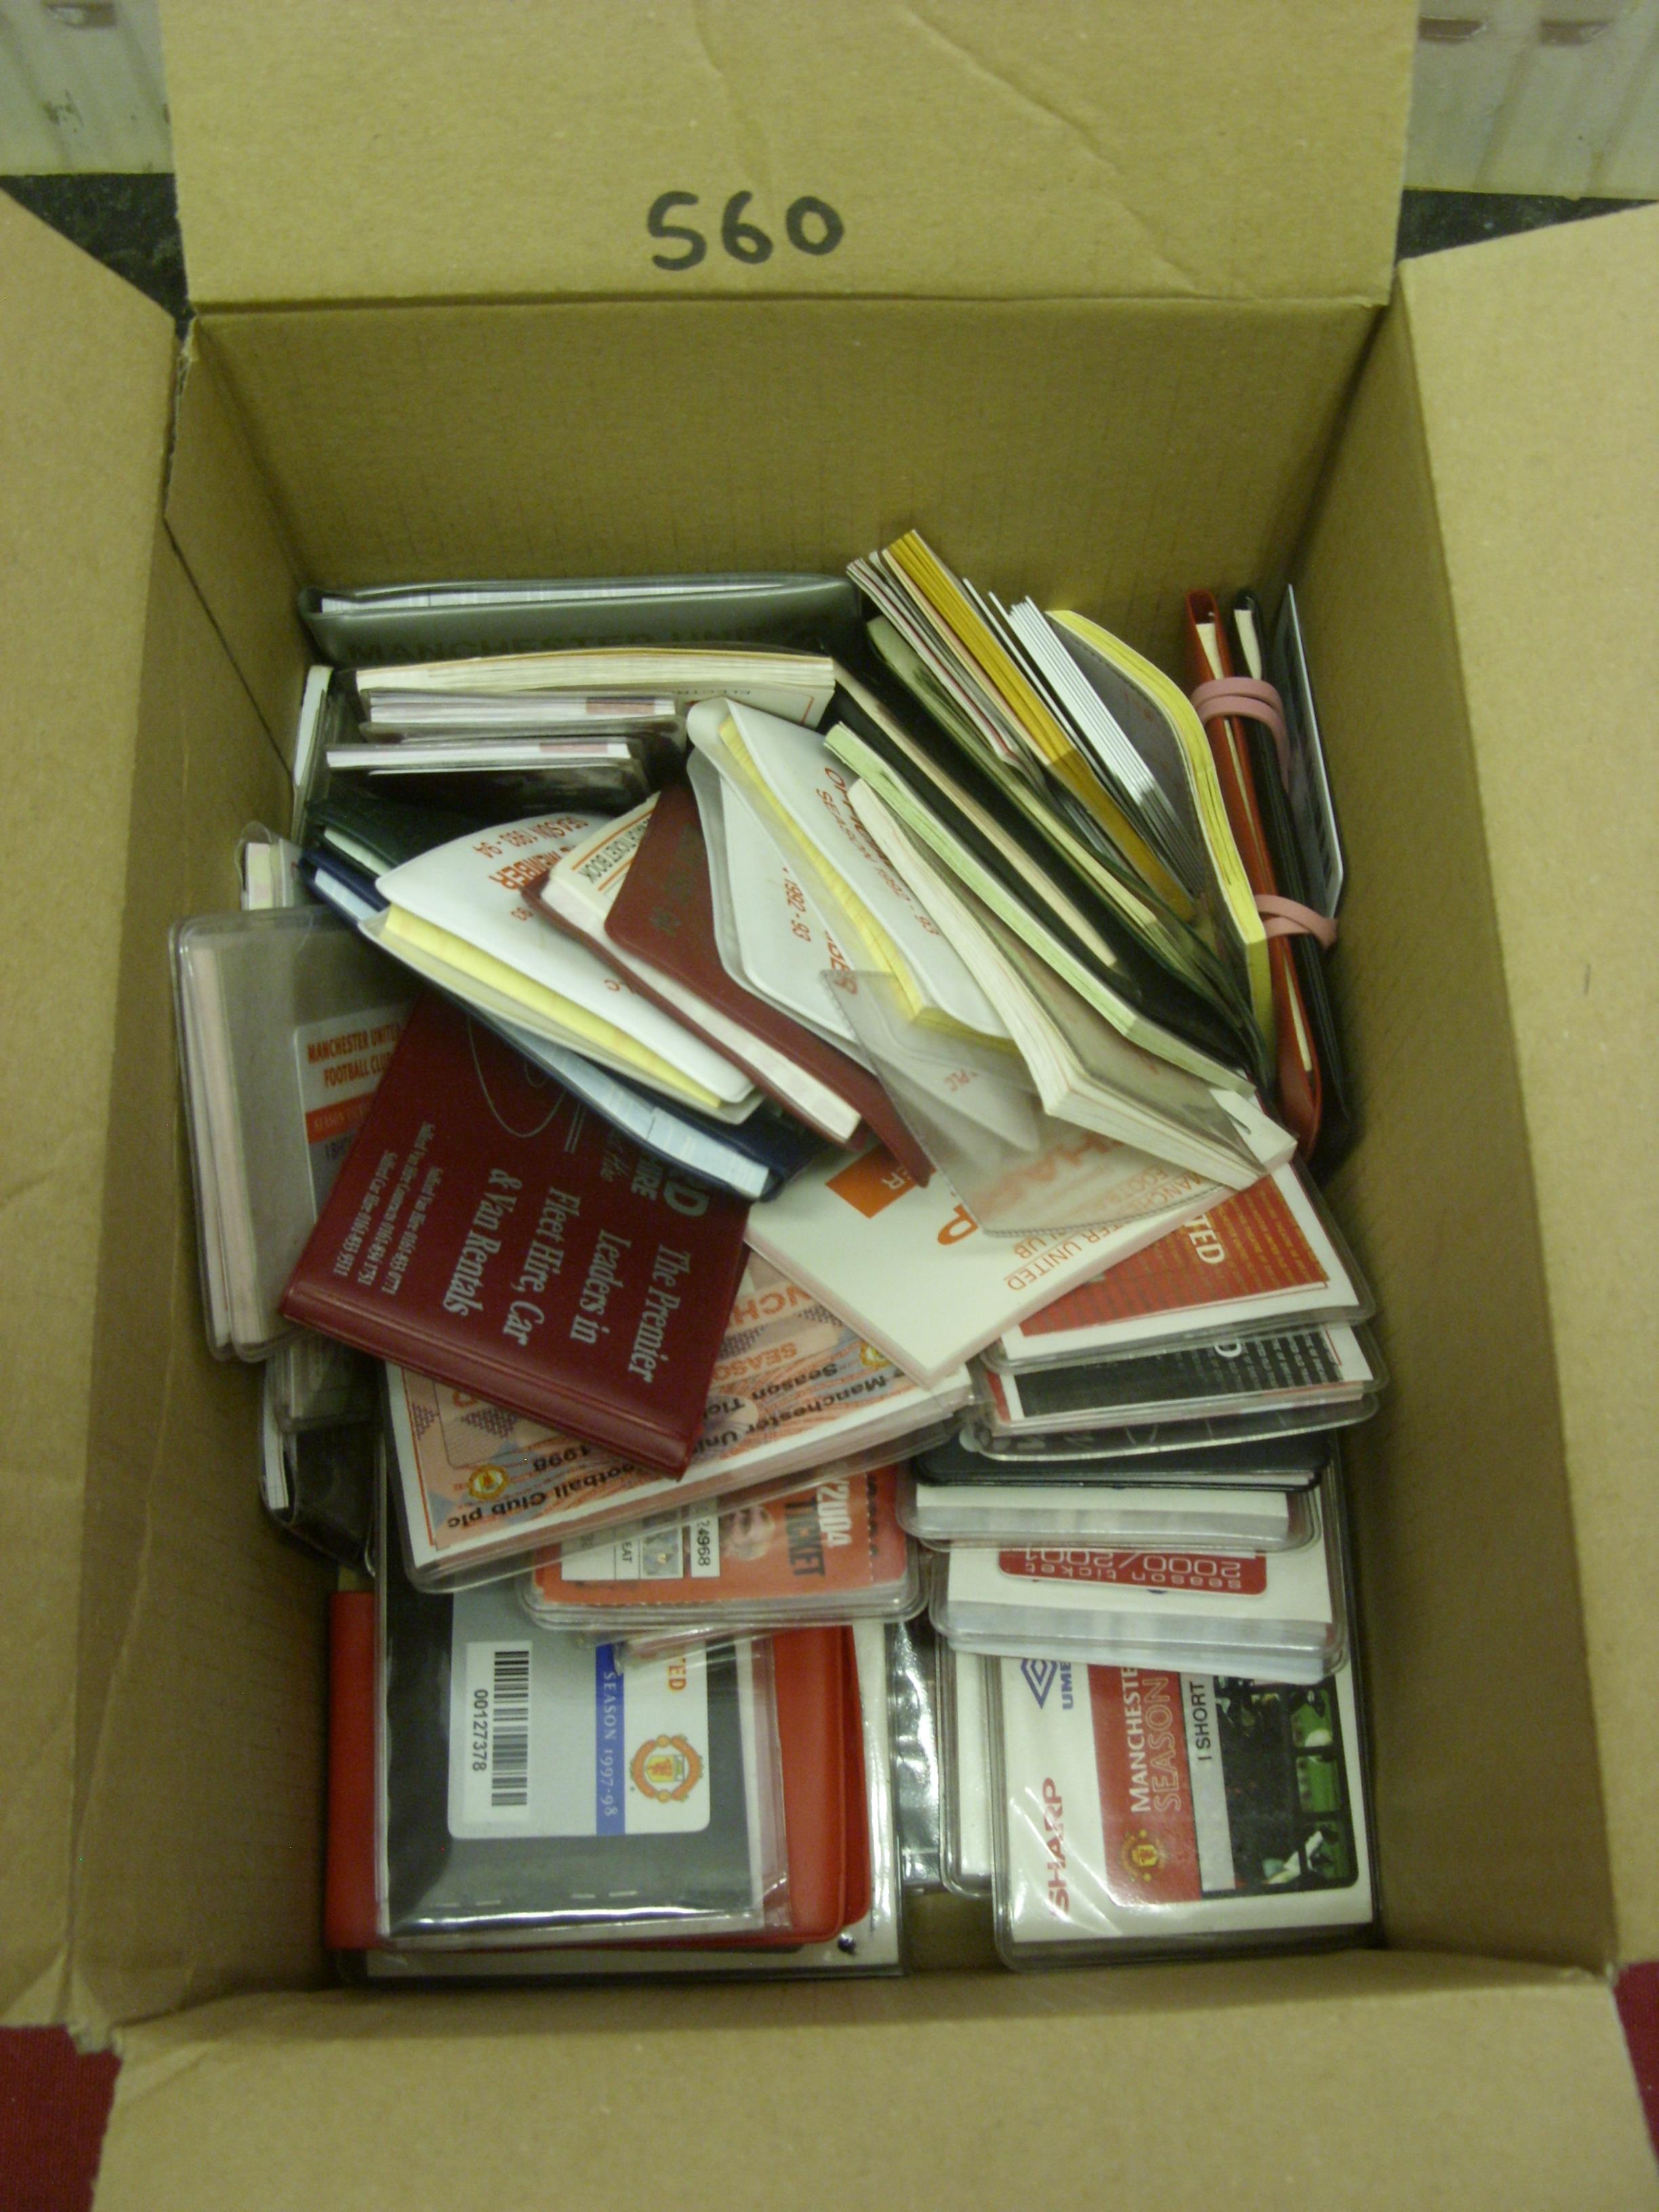 Manchester Utd, season ticket books/credit card style tickets, a collection of 40 books and 15 credi